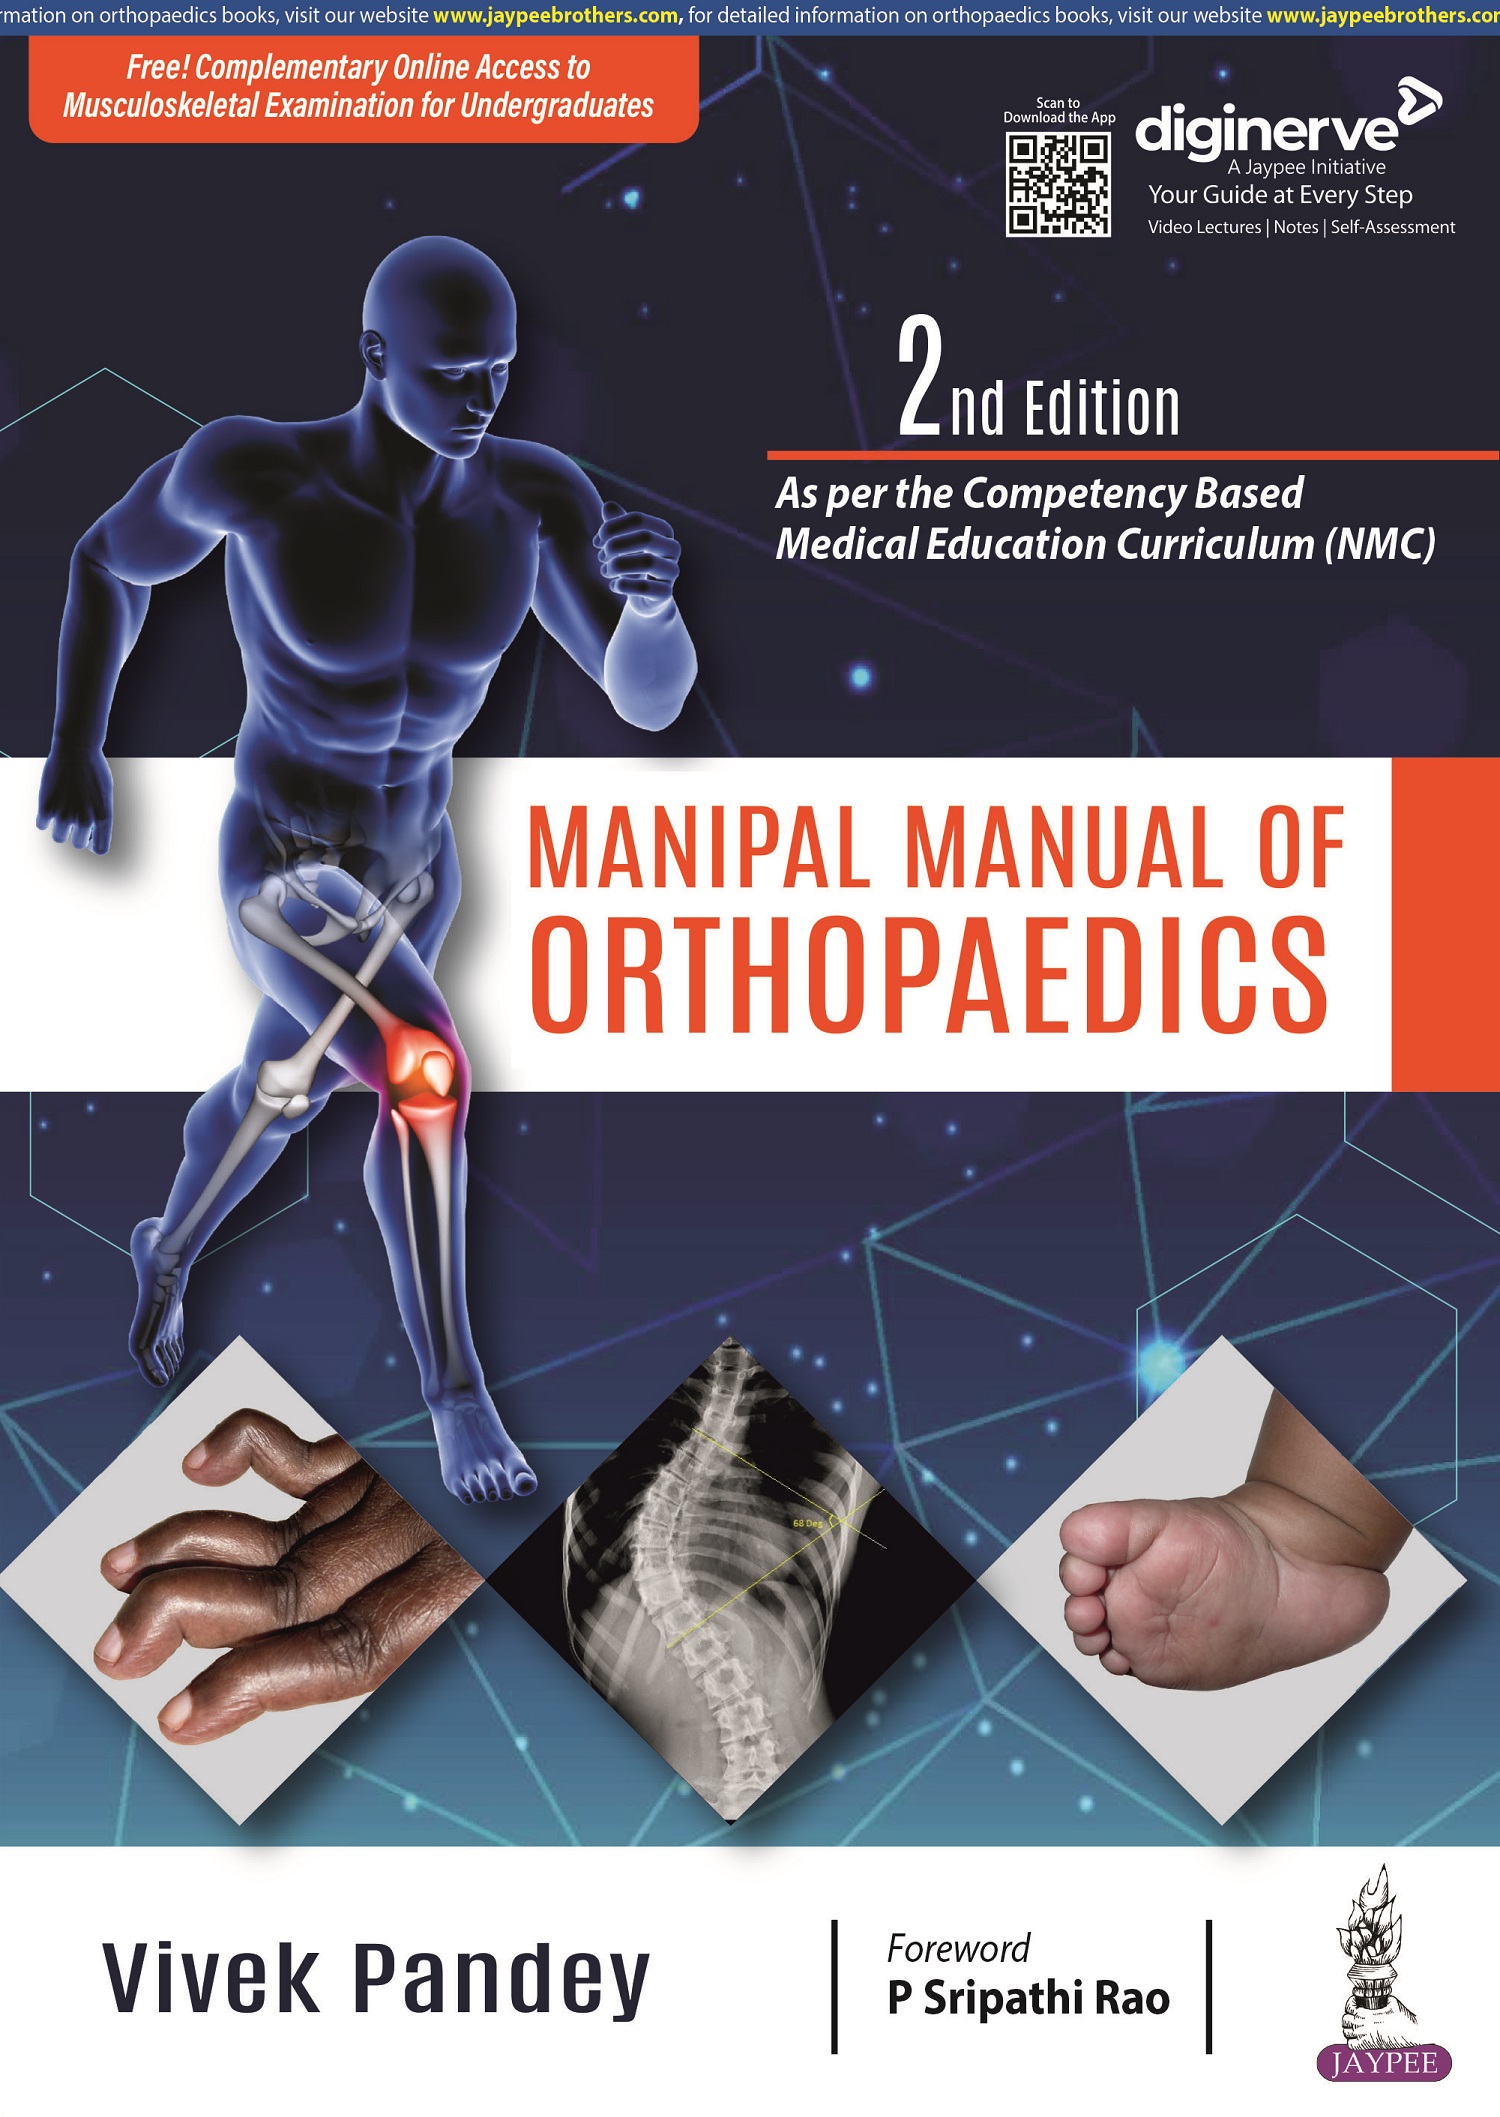 Manipal Manual of Orthopaedics (Free! Complementary Online Access to Musculoskeletal Examination for Undergraduates)